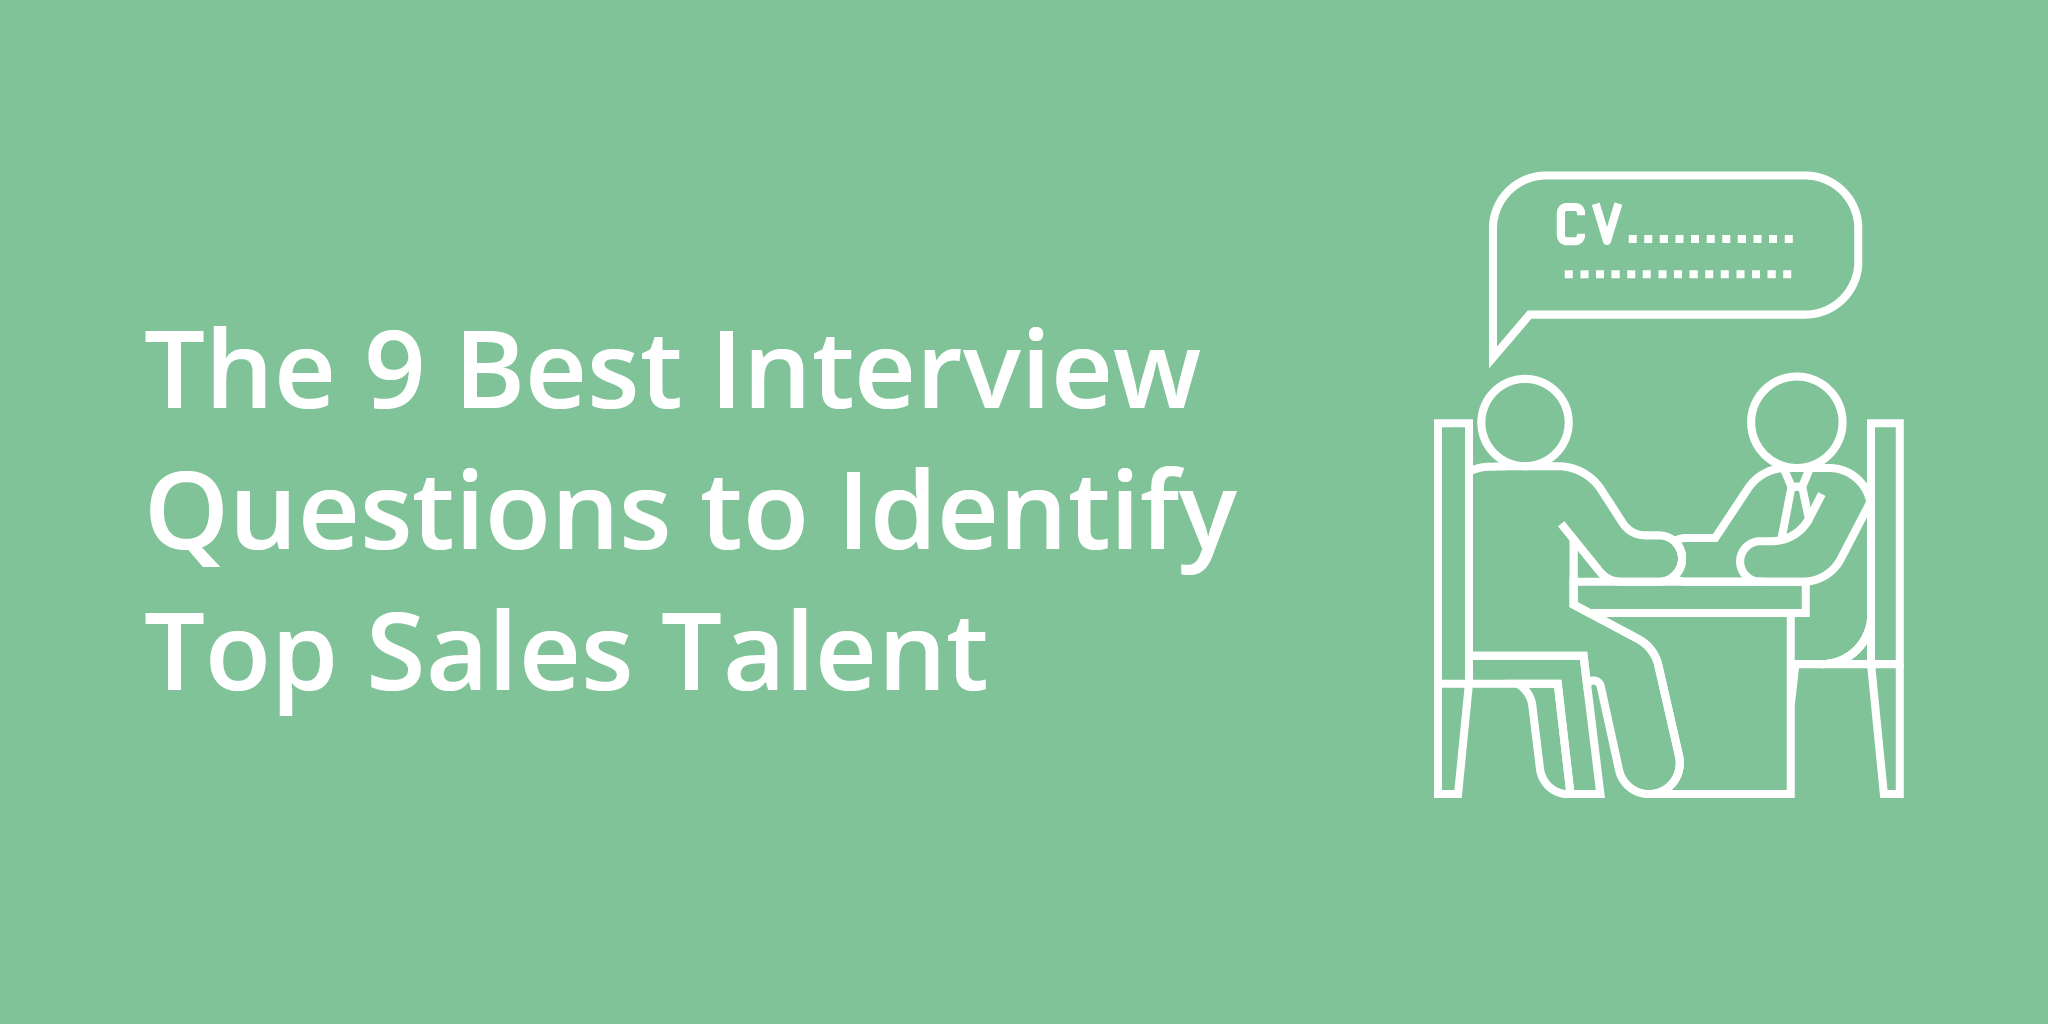 The 9 Best Interview Questions to Identify Top Sales Talent | Telephones for business